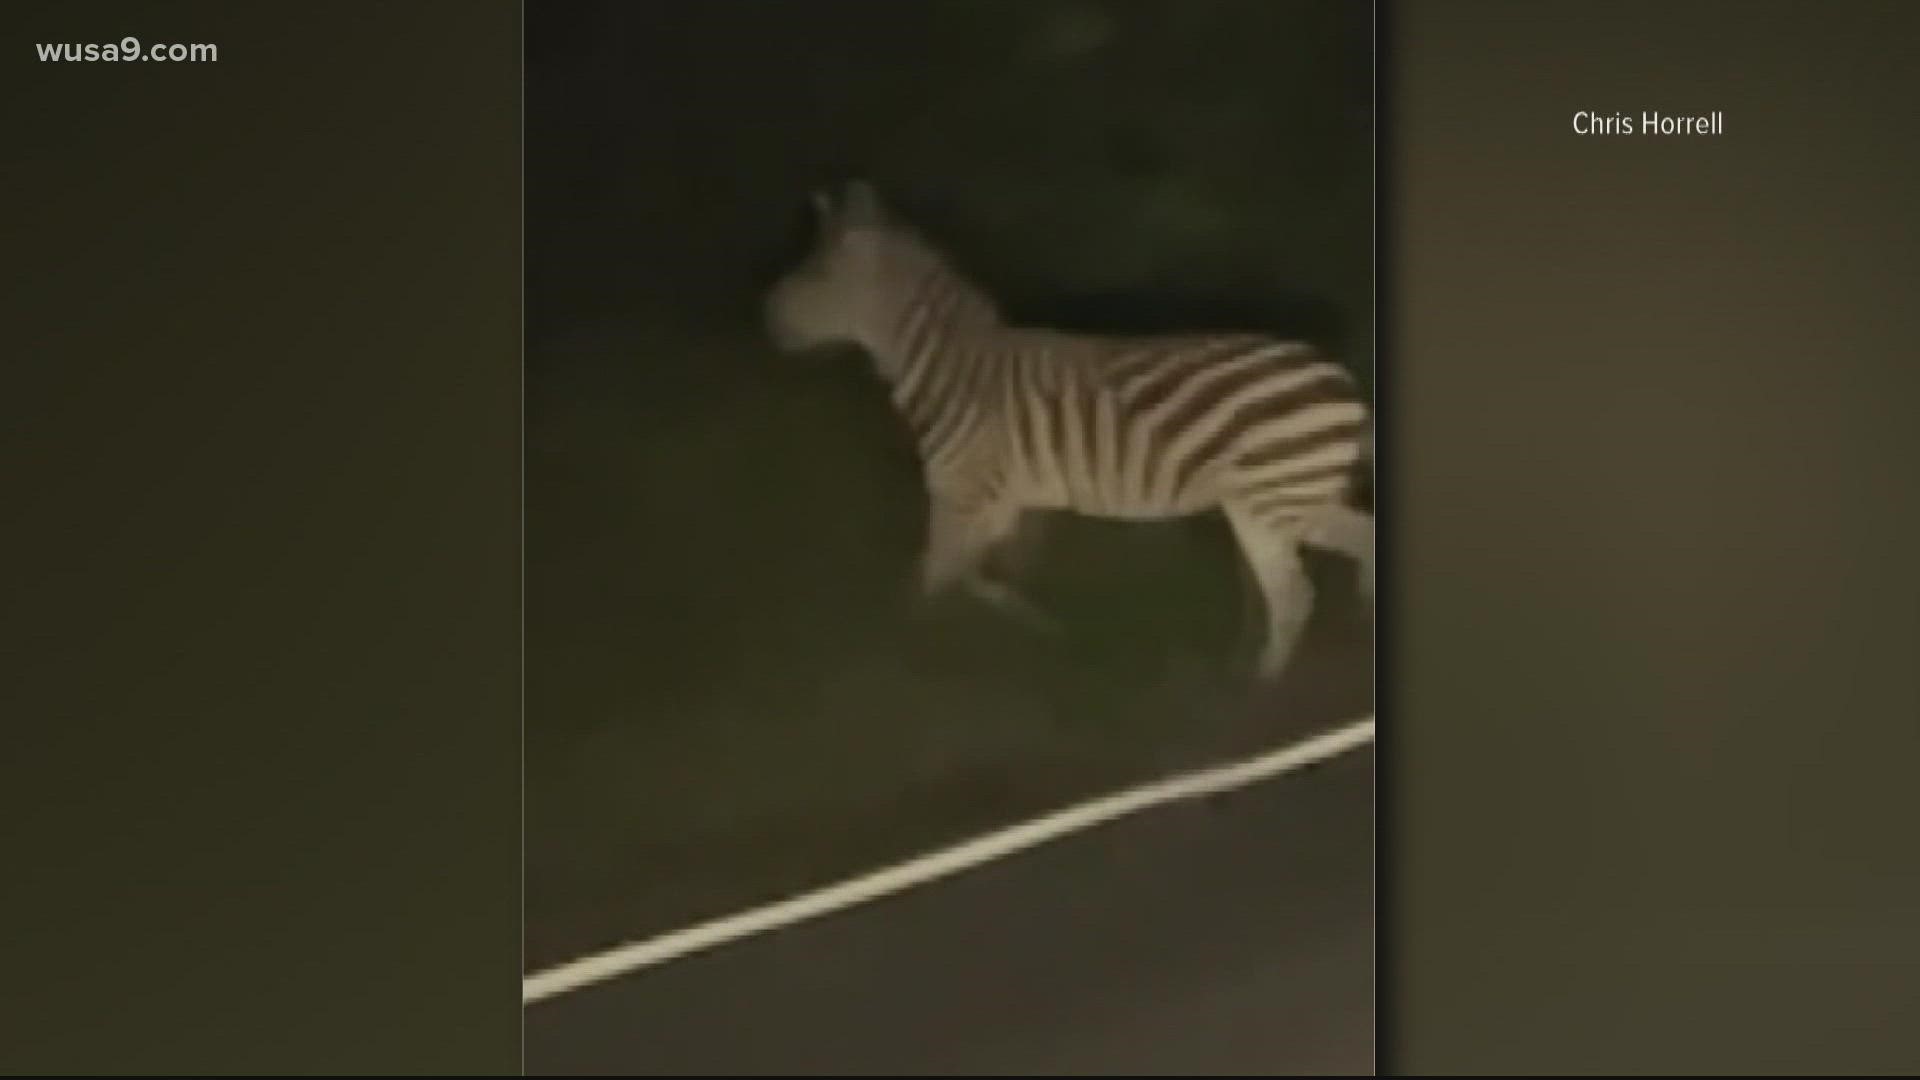 Officials say they found the deceased zebra in a snare trap near a field. Snare traps are illegal in Prince George's County.